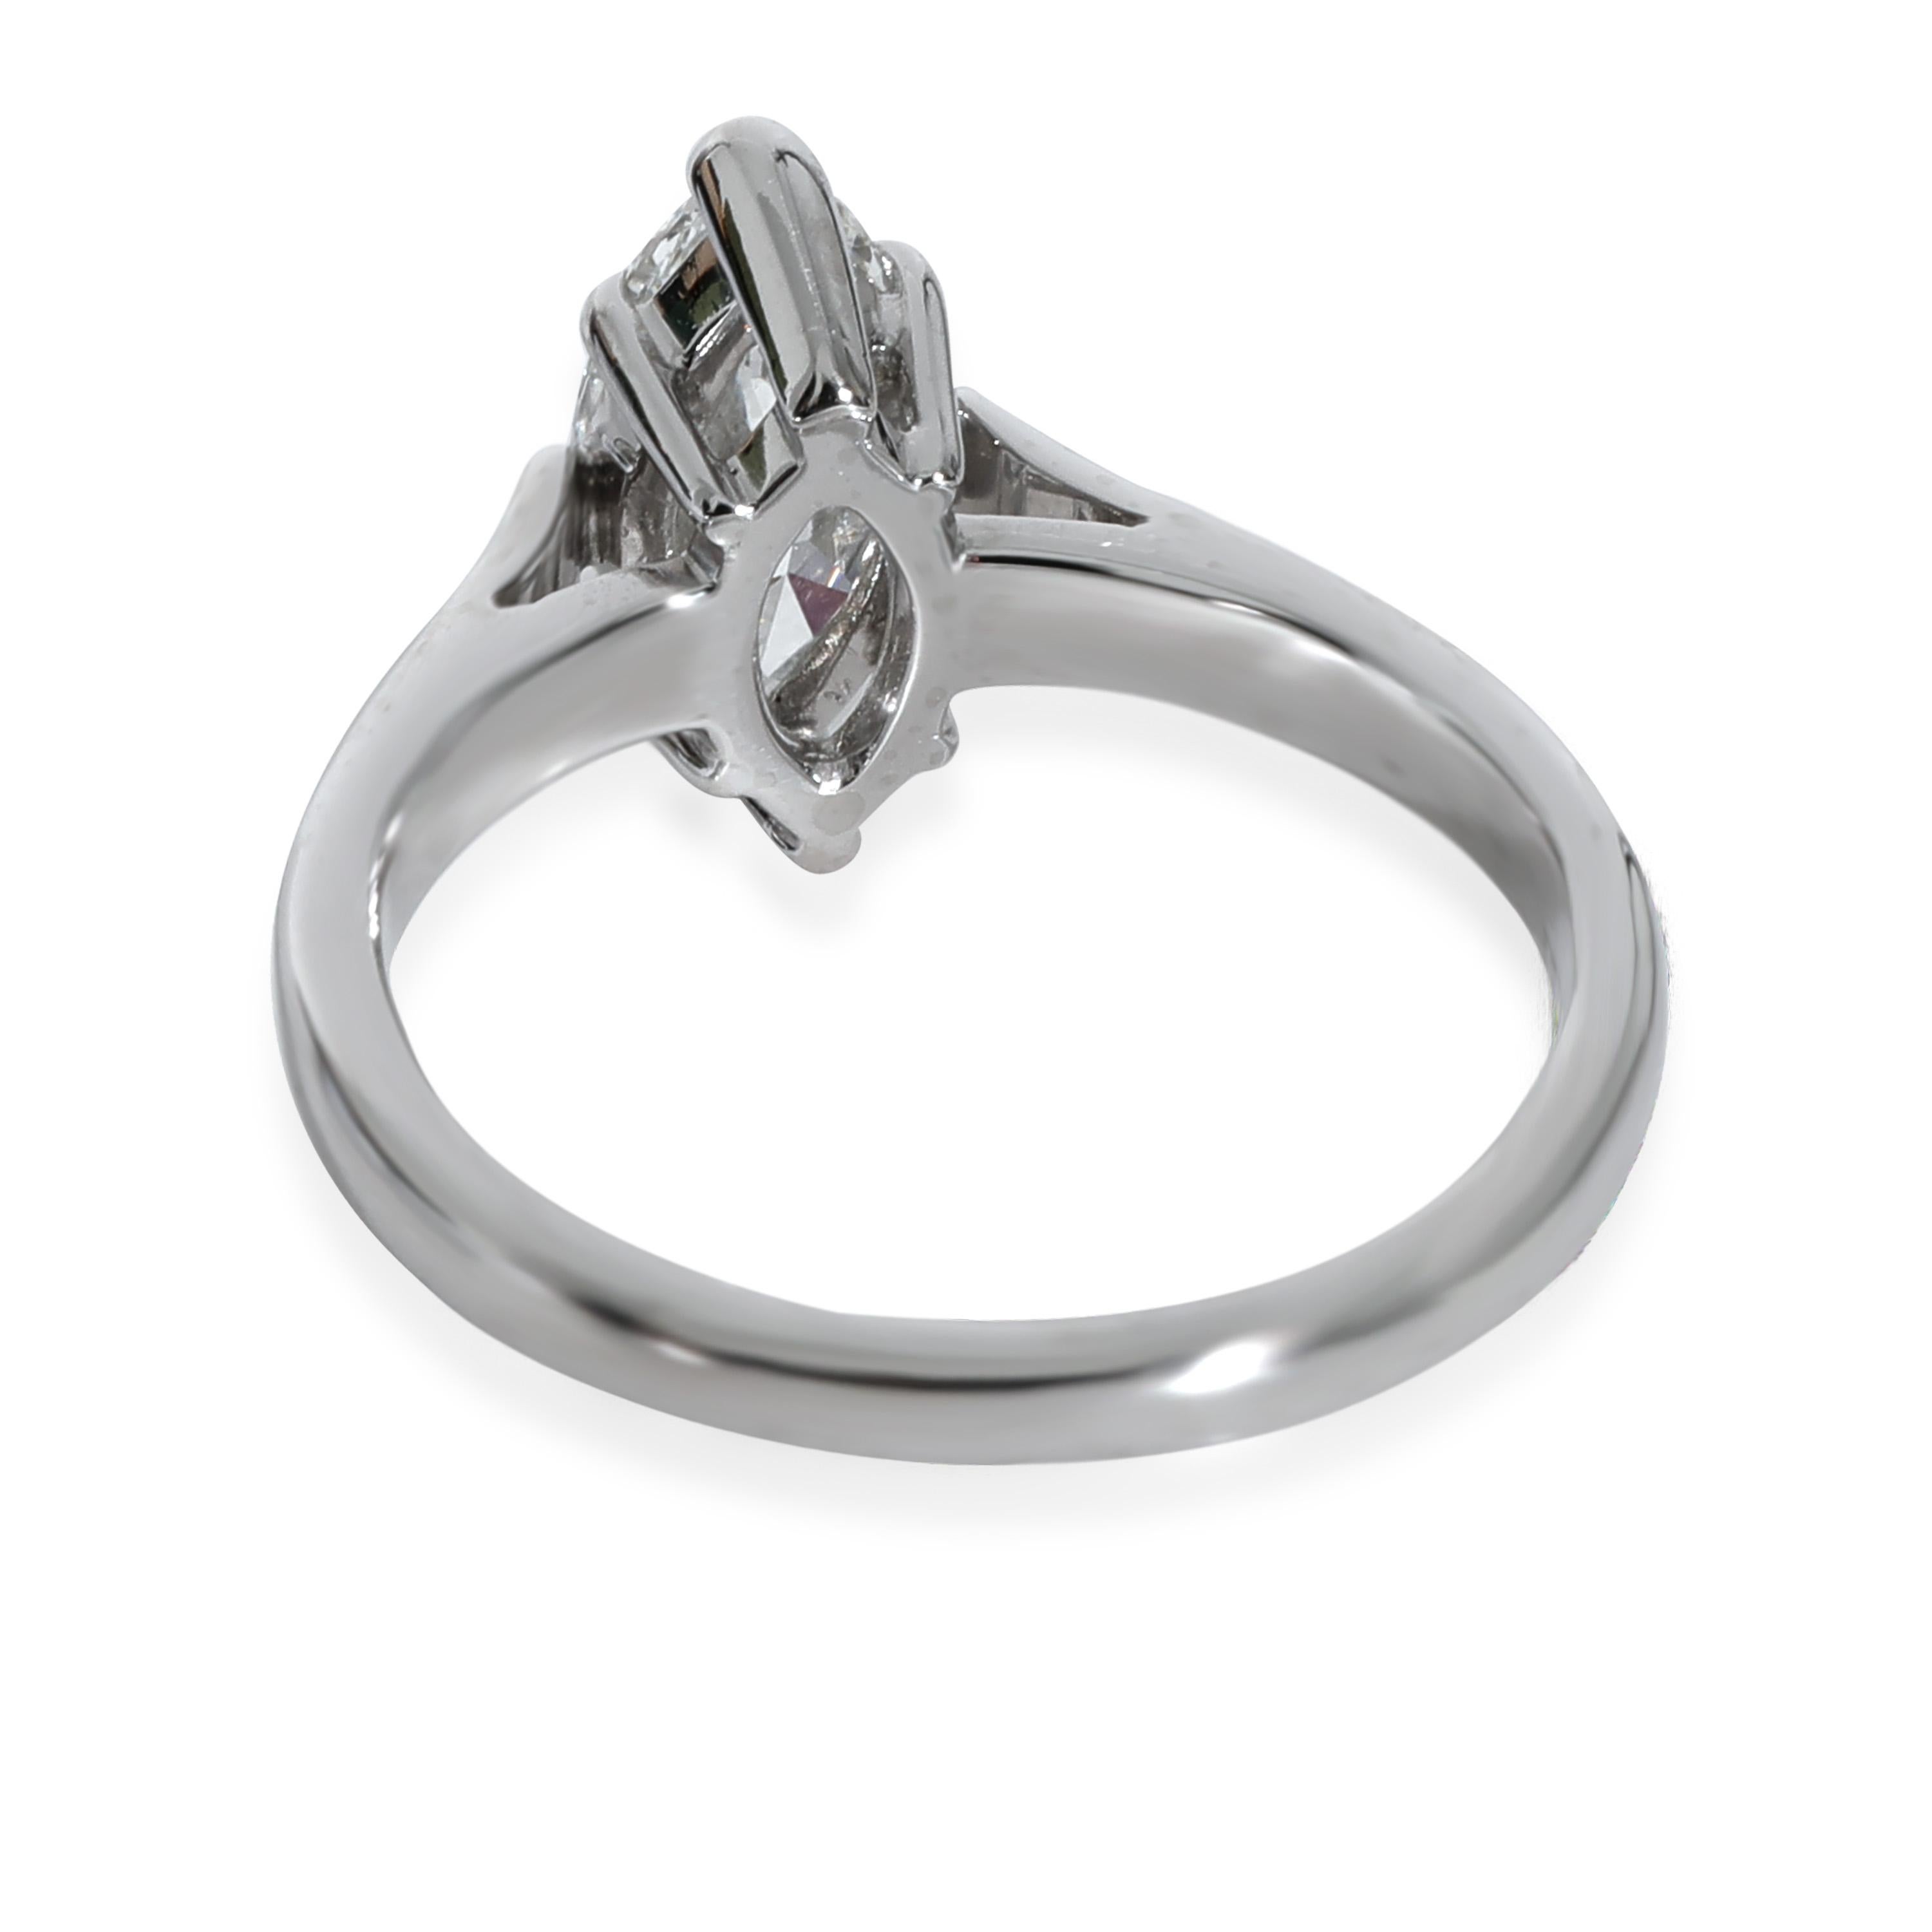 Tiffany & Co. Marquise Solitaire Diamond Ring in  Platinum E VVS2 1.22 CTW

PRIMARY DETAILS
SKU: 130179
Listing Title: Tiffany & Co. Marquise Solitaire Diamond Ring in  Platinum E VVS2 1.22 CTW
Condition Description: The classic engagement ring.